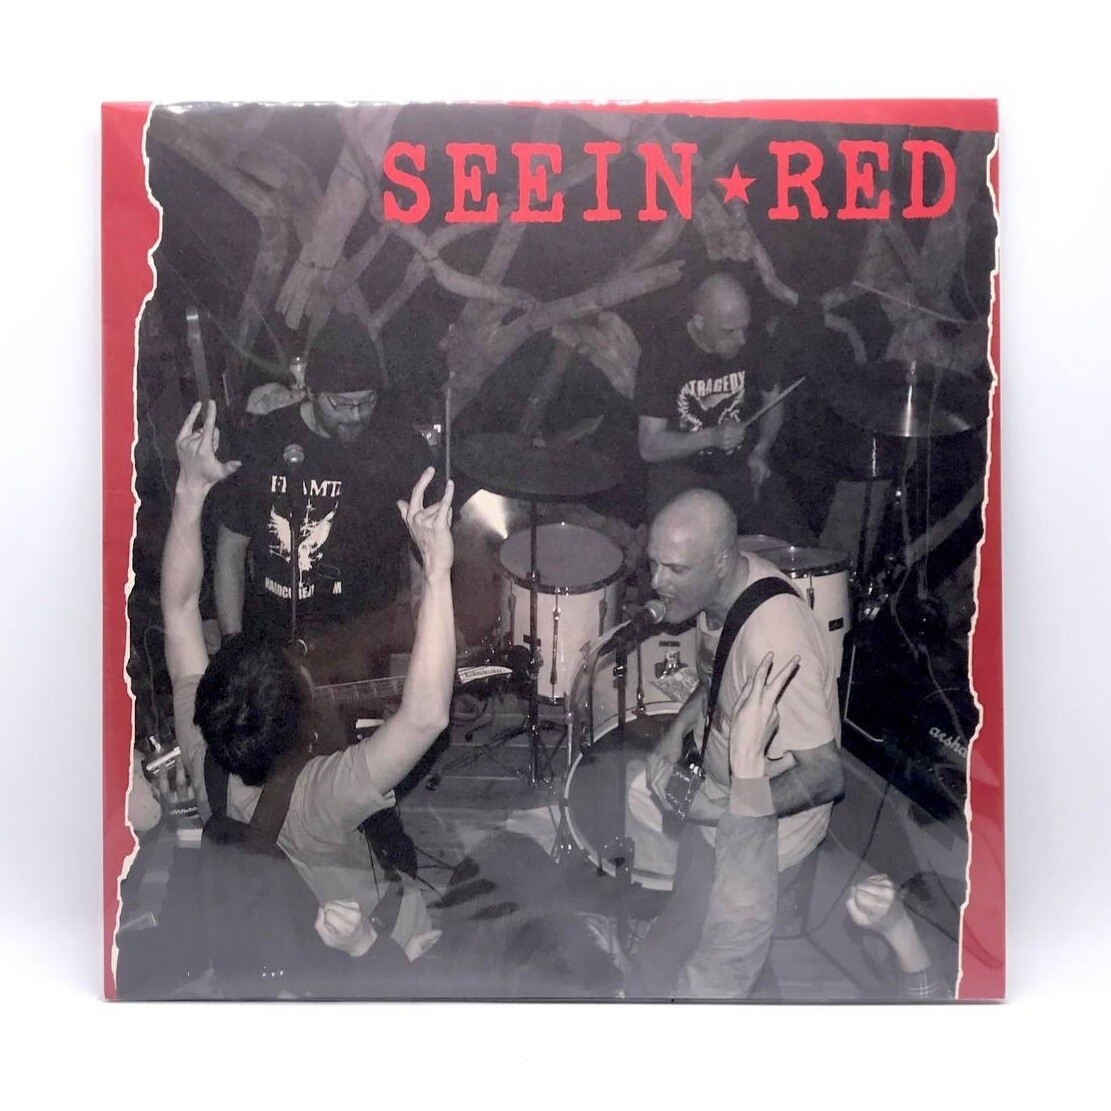 [USED] SEEIN RED -WE NERD TO DO MORE THAN JUST MUSIC- LP (RED VINYL)